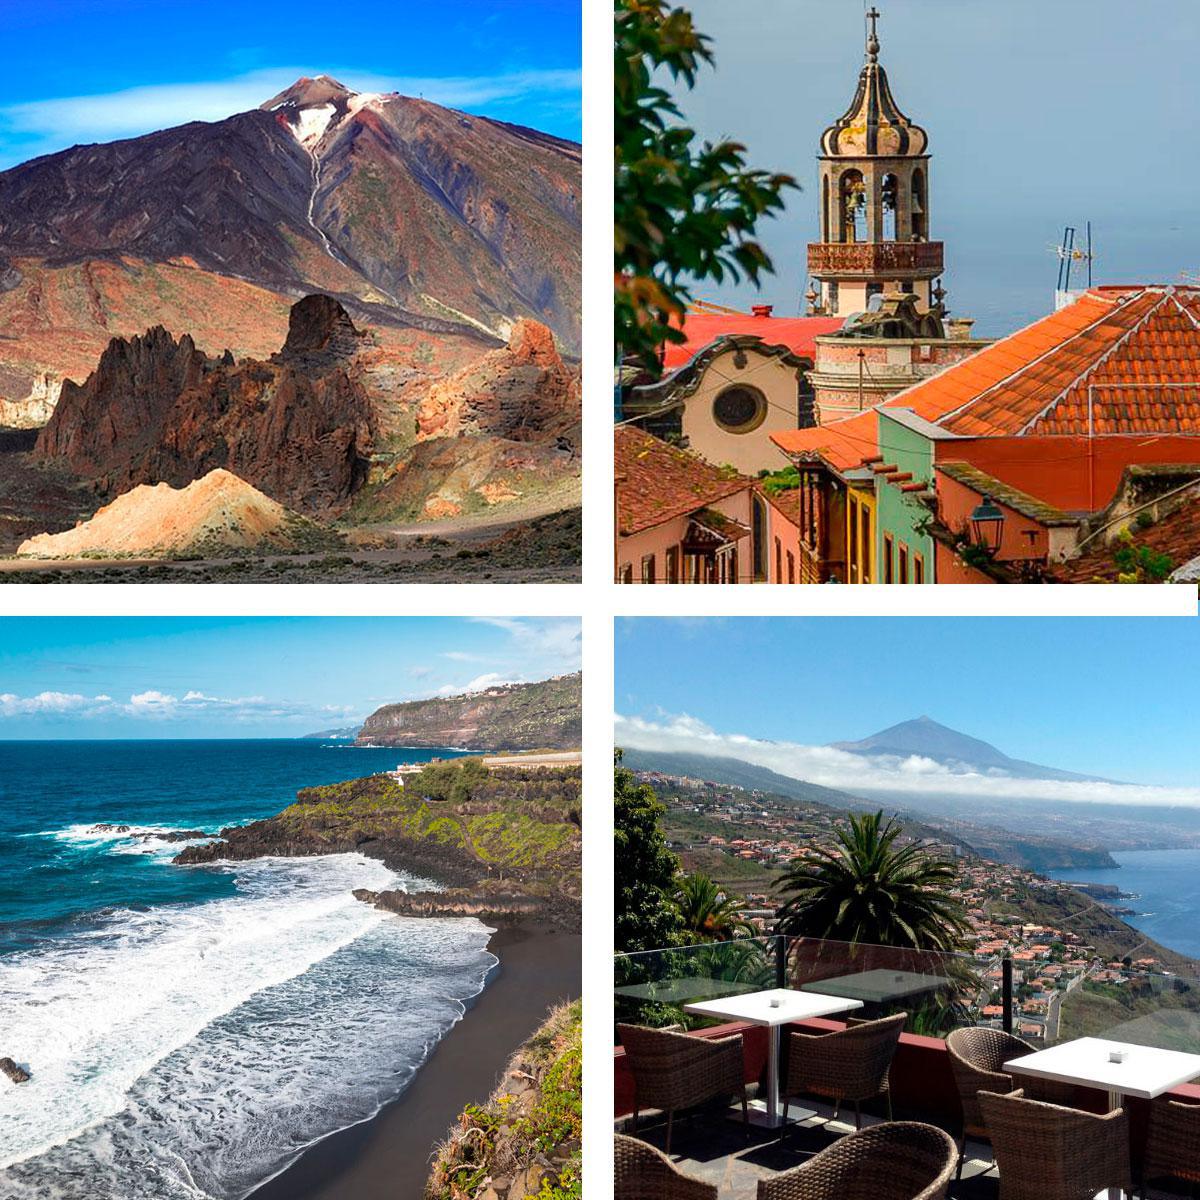 From Teide to the Orotava